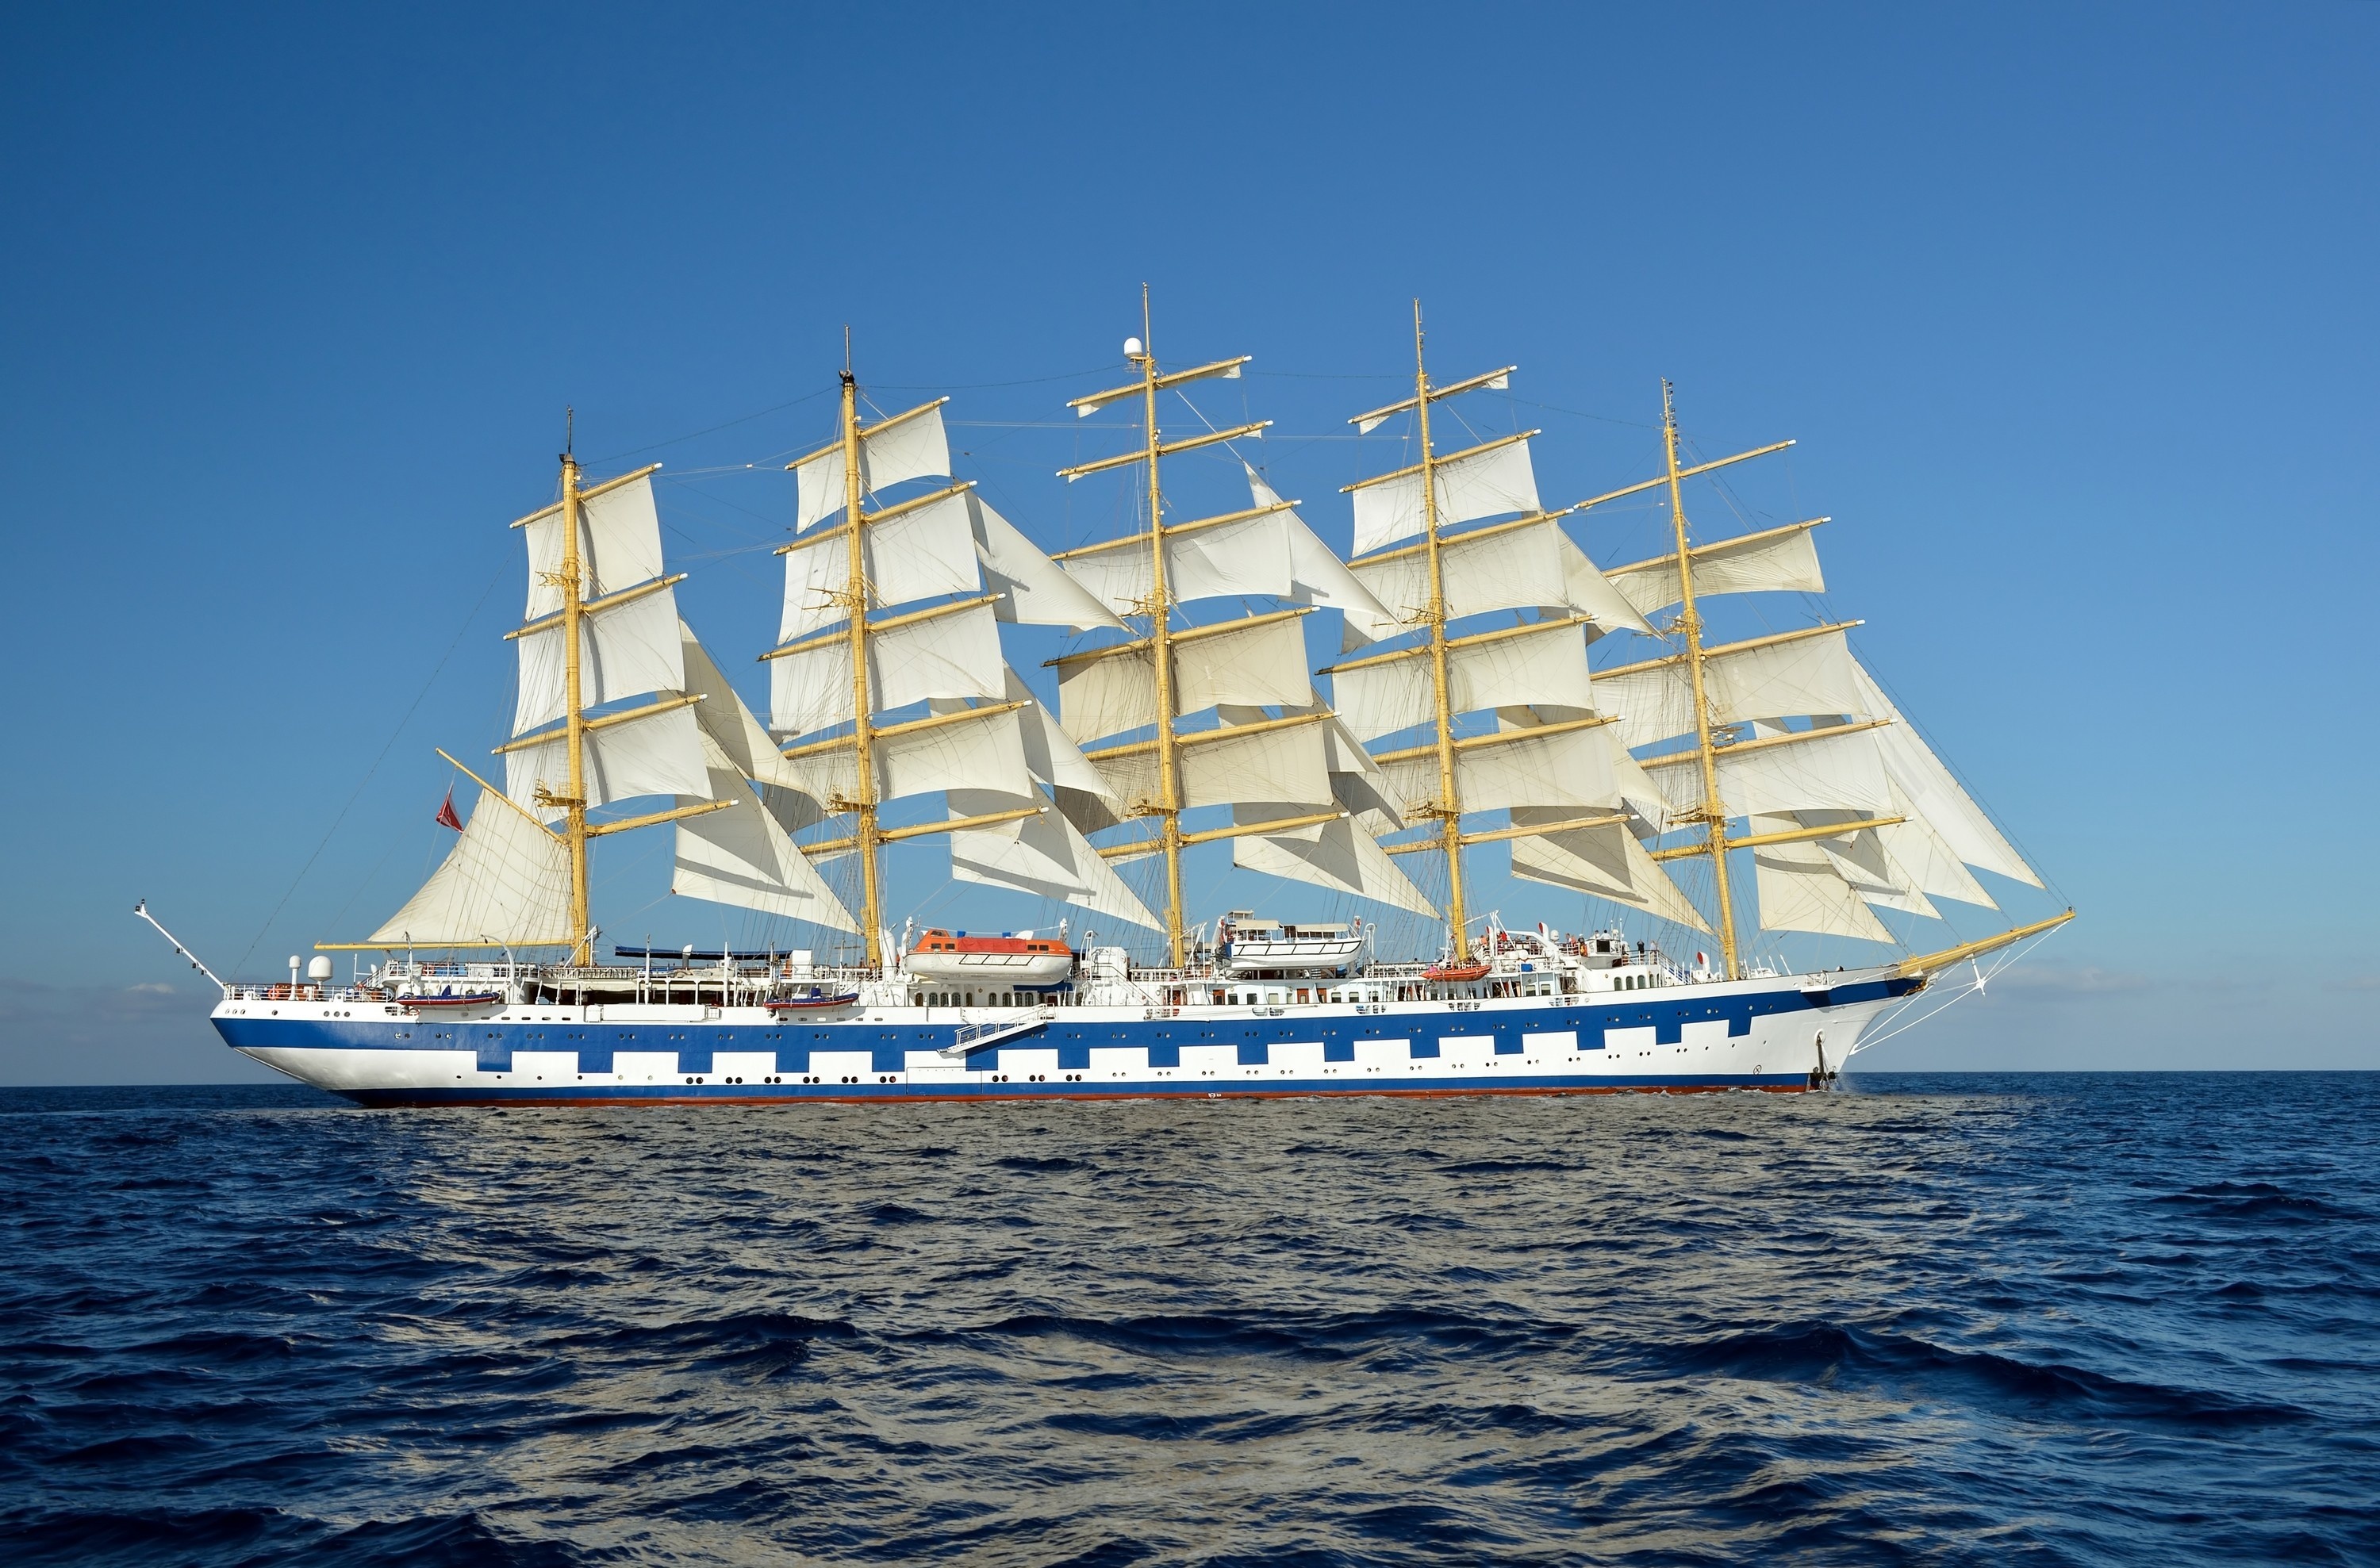 Windjammer: Royal Clipper, The only biggest and 5 mast fully rigged sailing ship built after the Preussen. 3000x1980 HD Background.